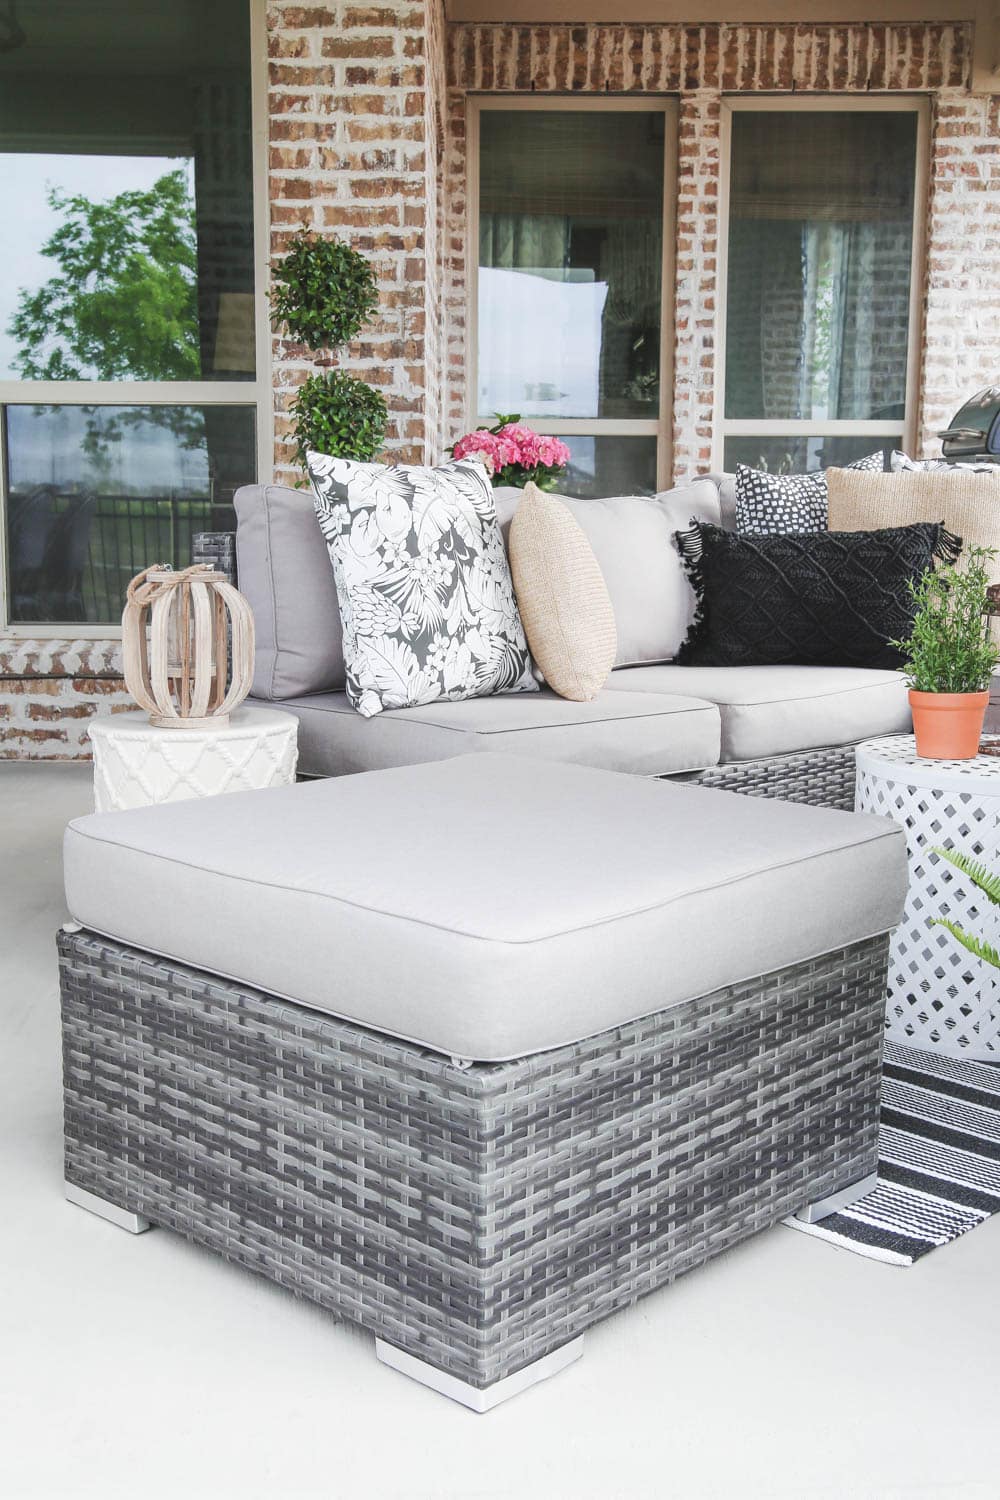 Refresh your outdoor space and update your patio for spring with these tips + a guide! #ad #AtHomeStores